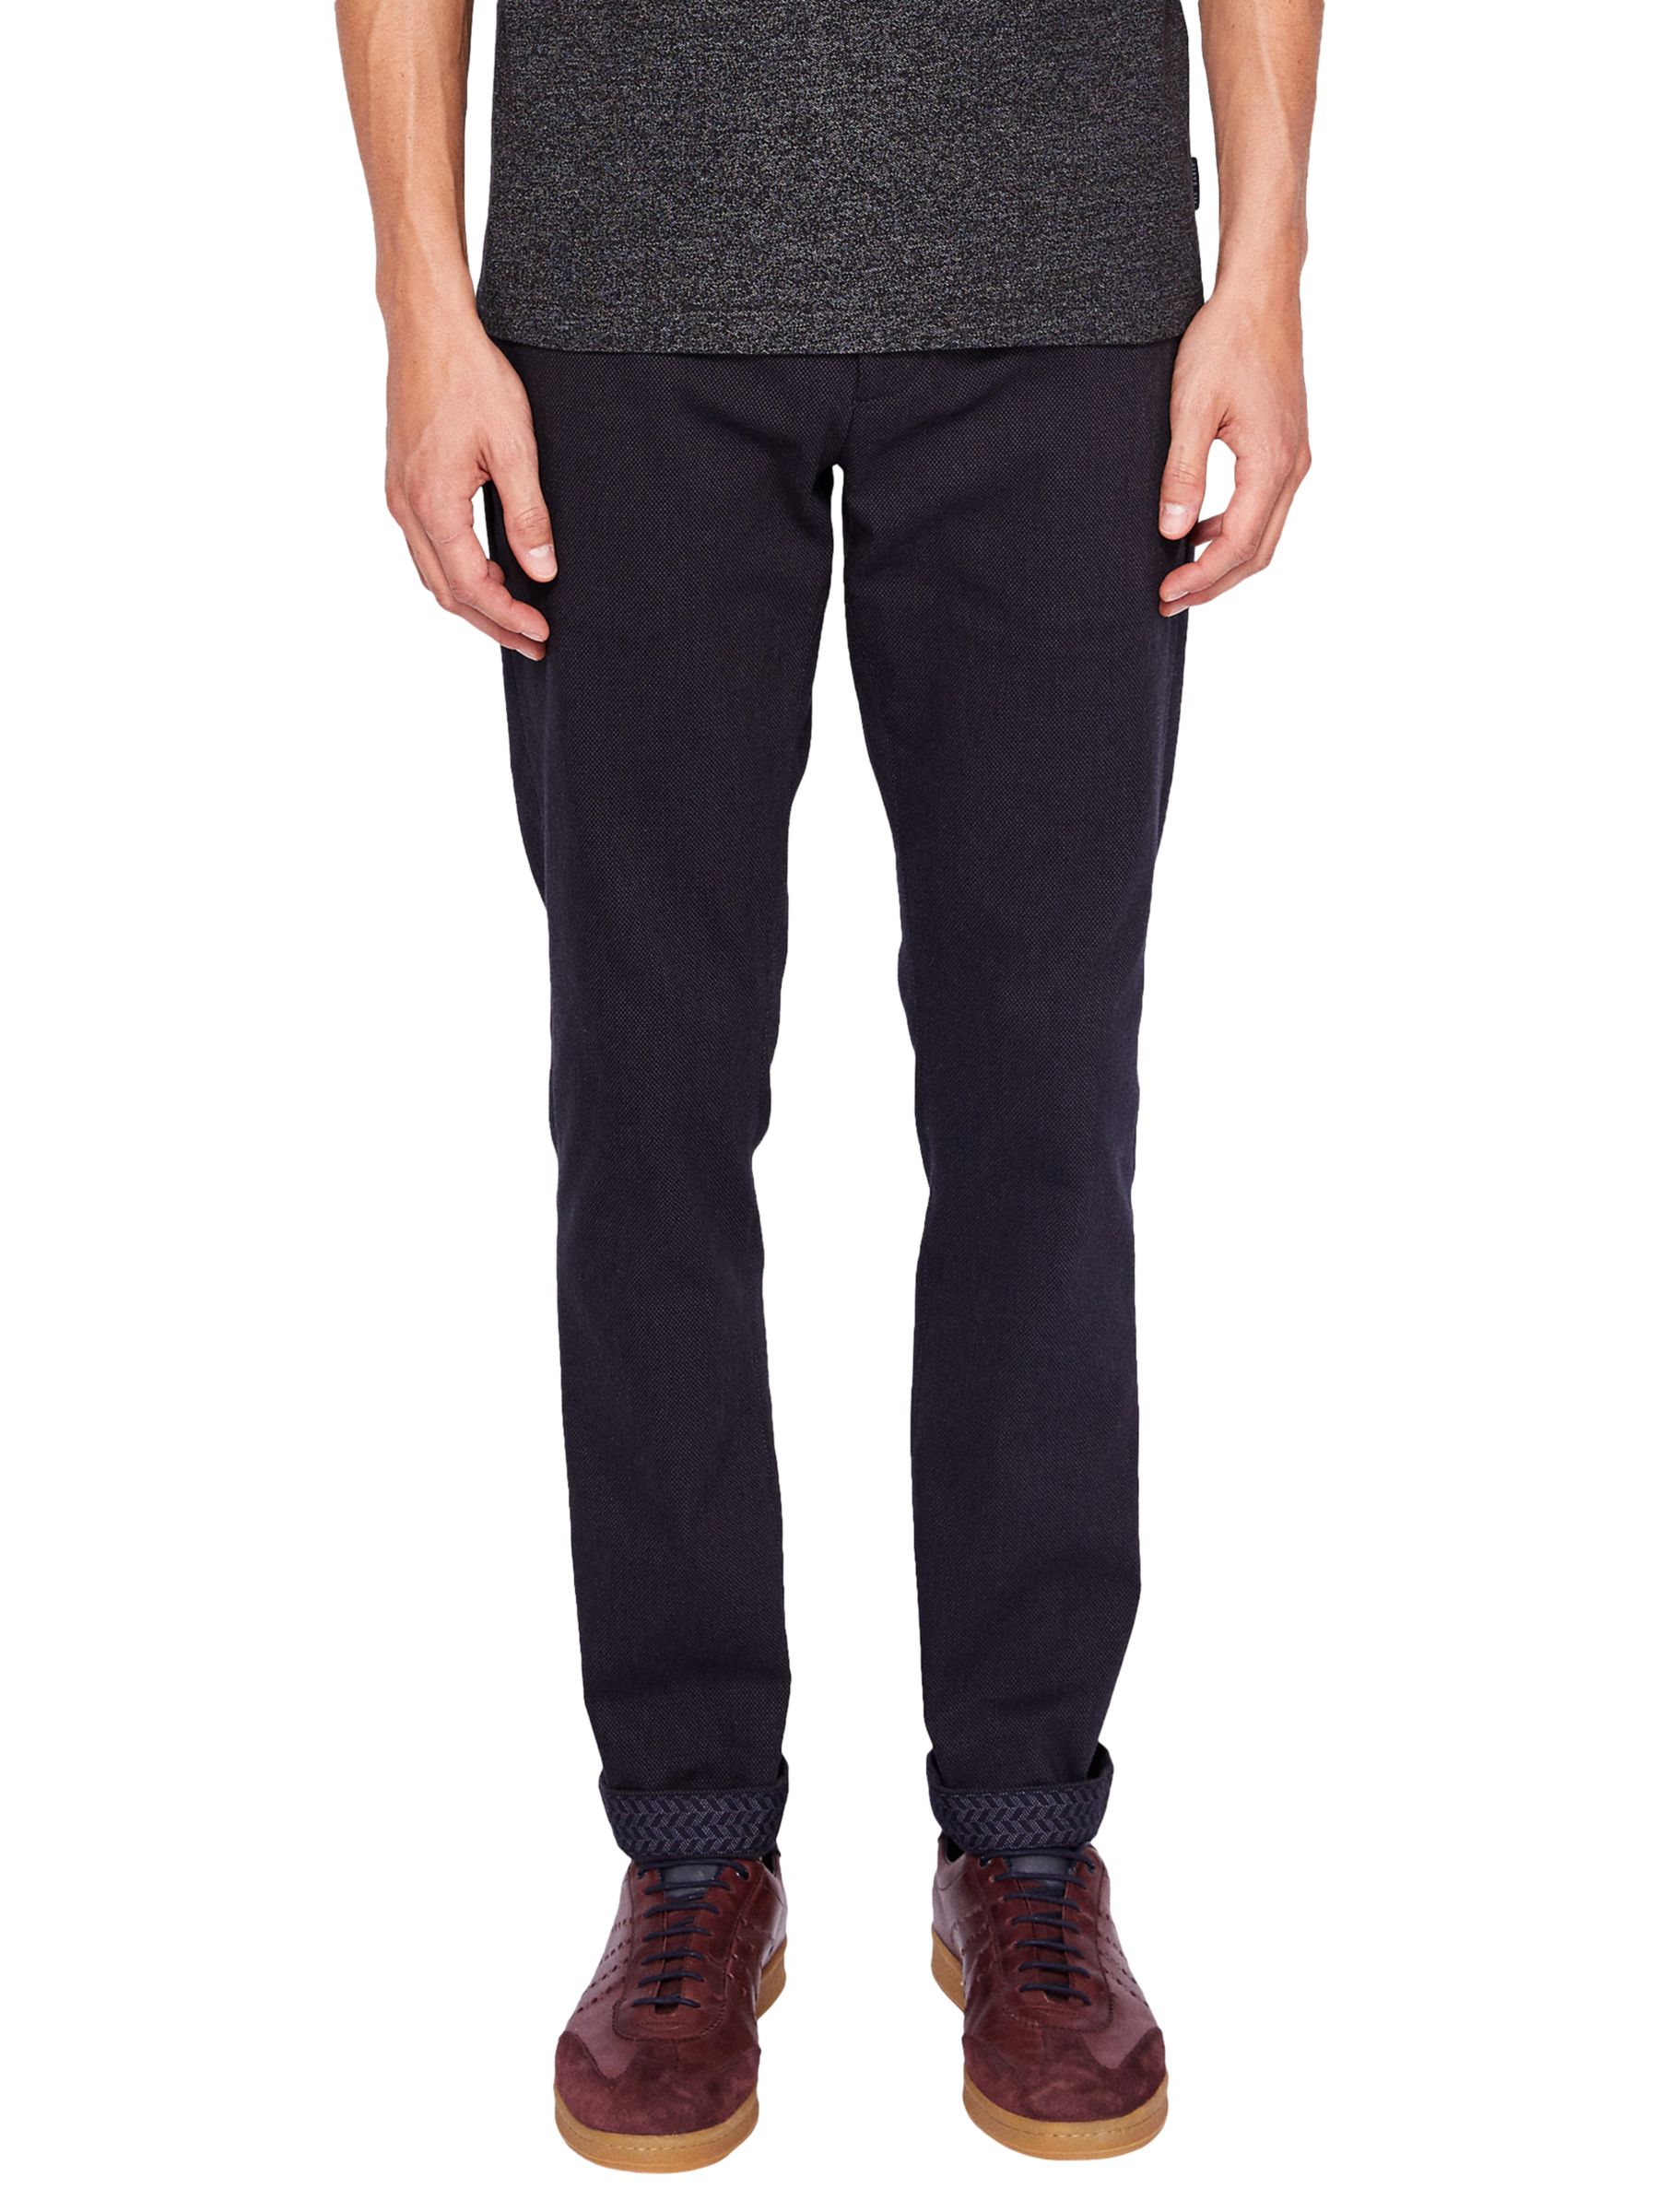 Ted Baker Maxchi Slim Fit Textured Trousers Review